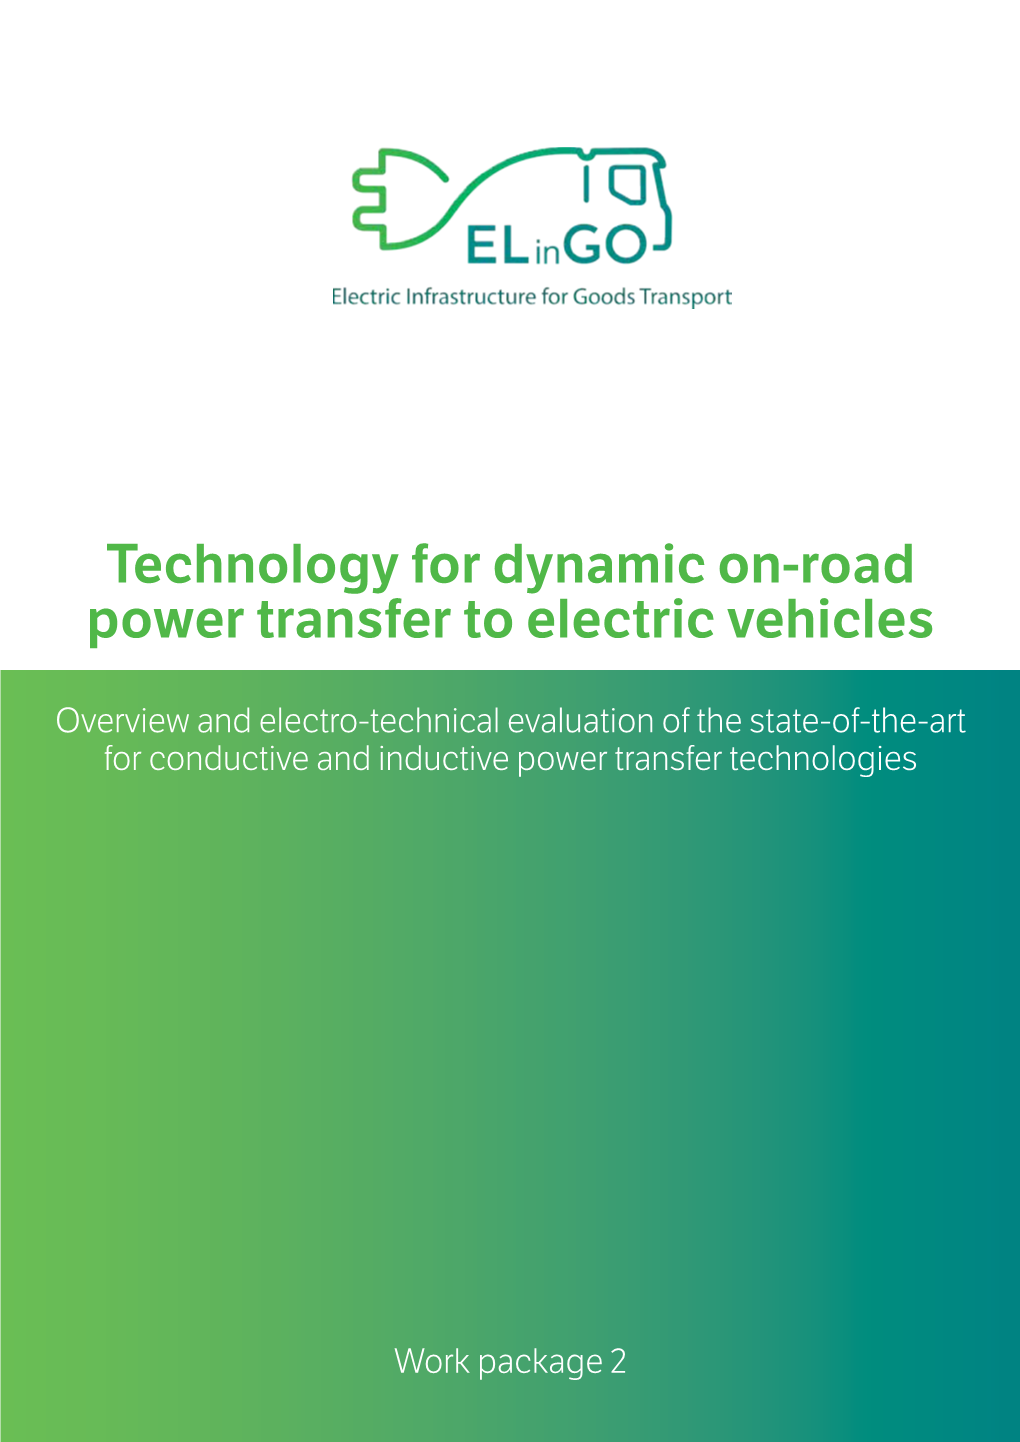 Technology for Dynamic On-Road Power Transfer to Electric Vehicles